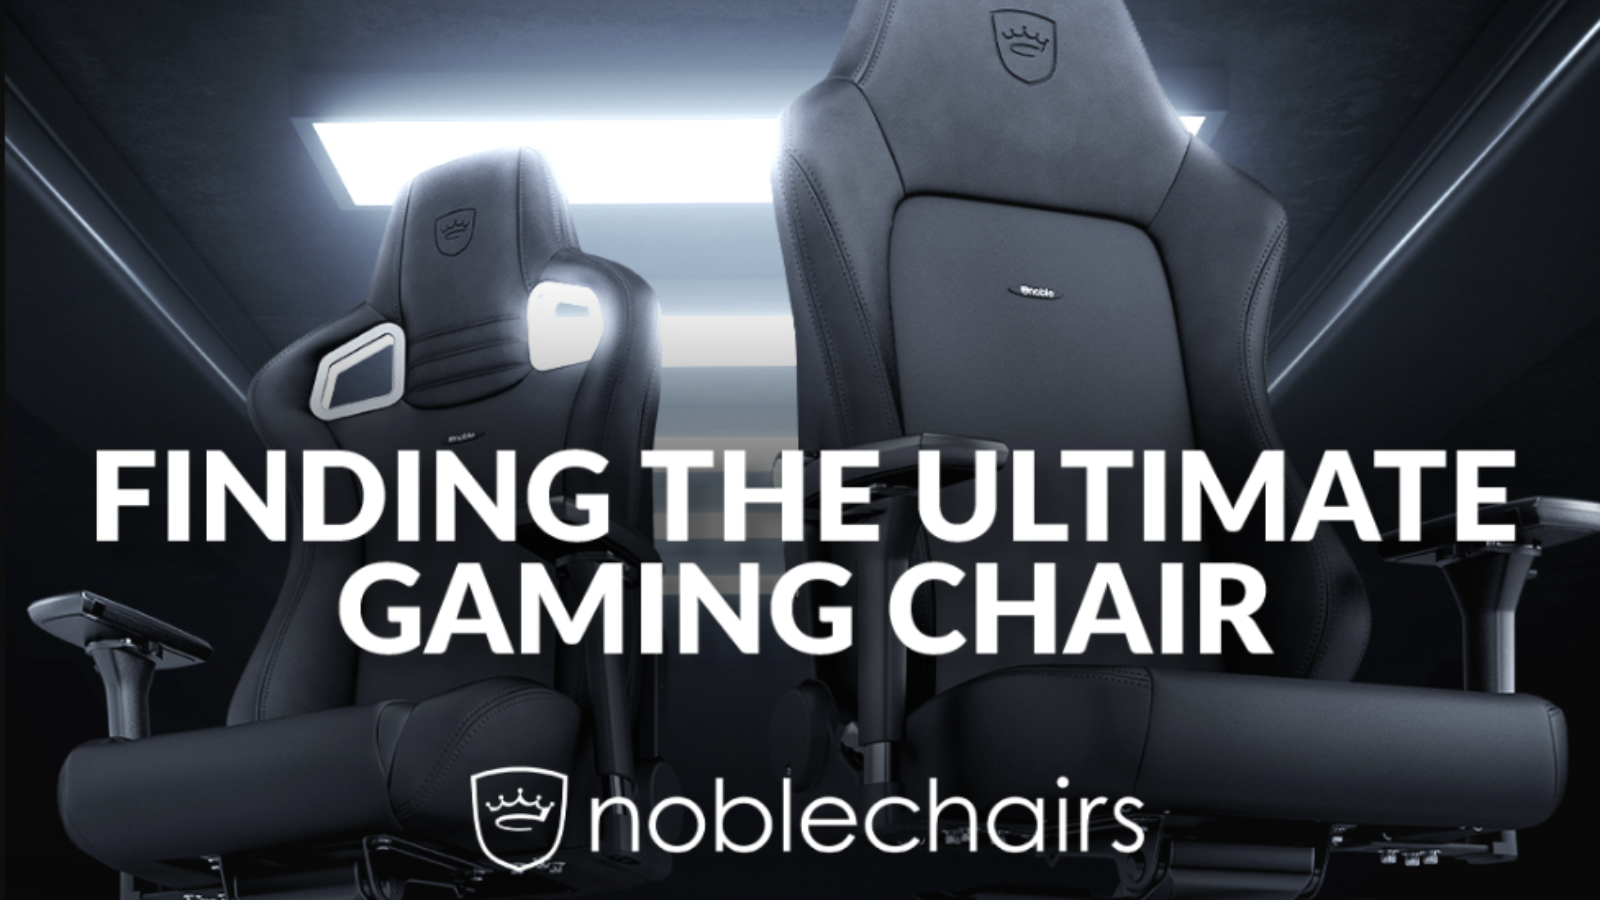 noblechairs - Your Guide to Finding the Ultimate Gaming Chair